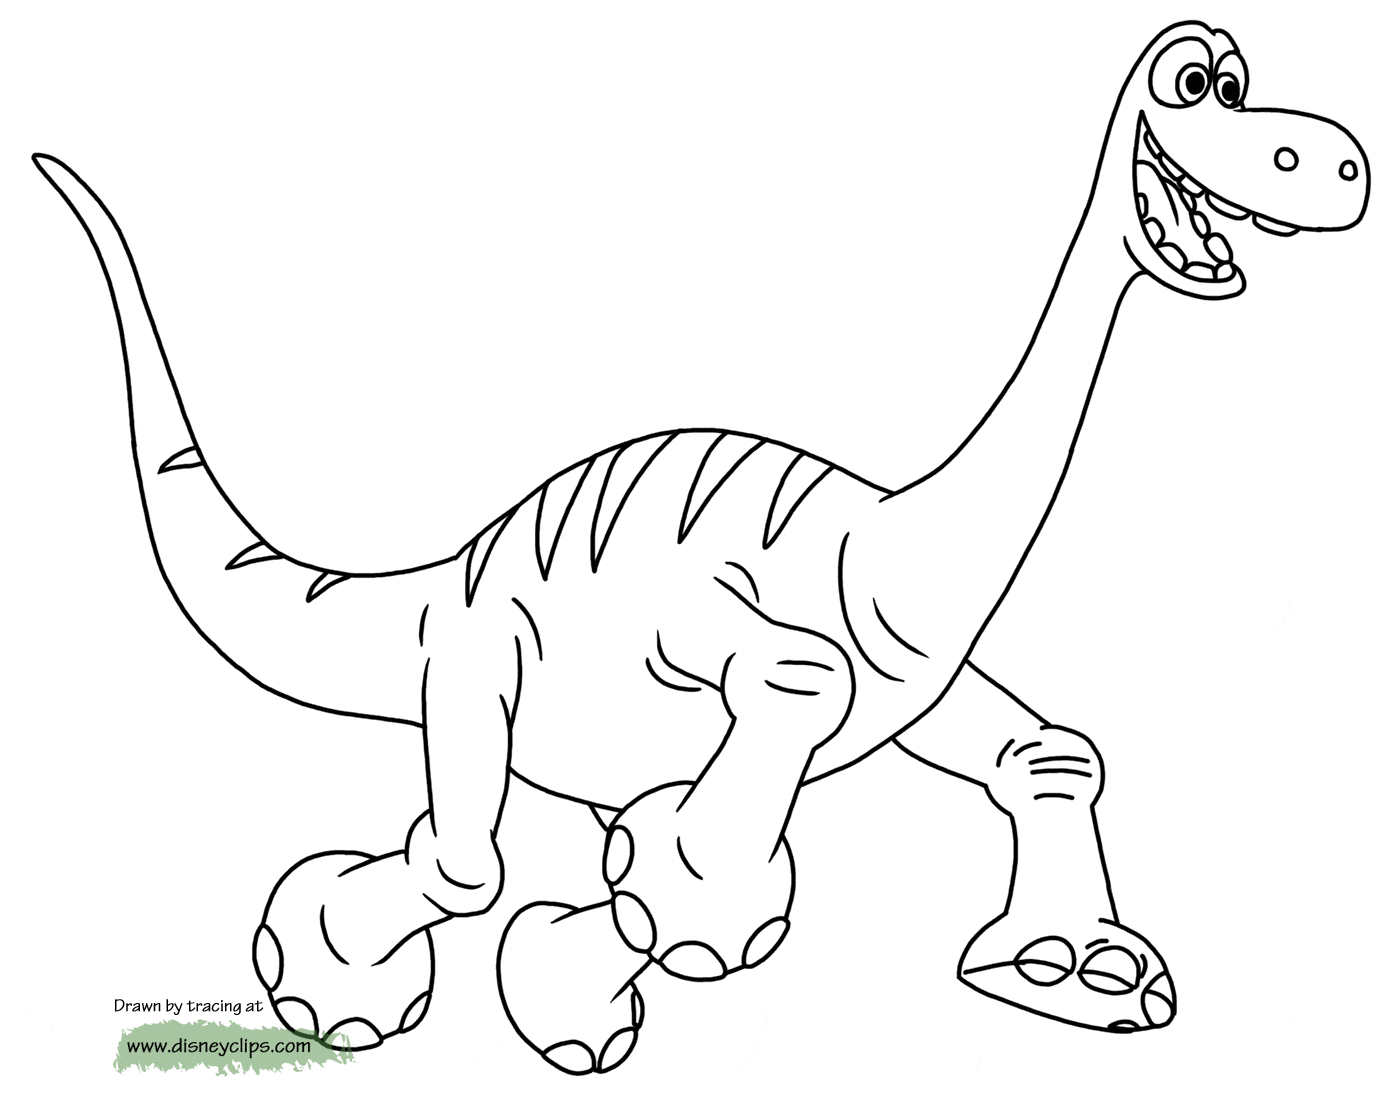 picture of a dinosaur to color the good dinosaur coloring pages disneyclipscom color a dinosaur to of picture 